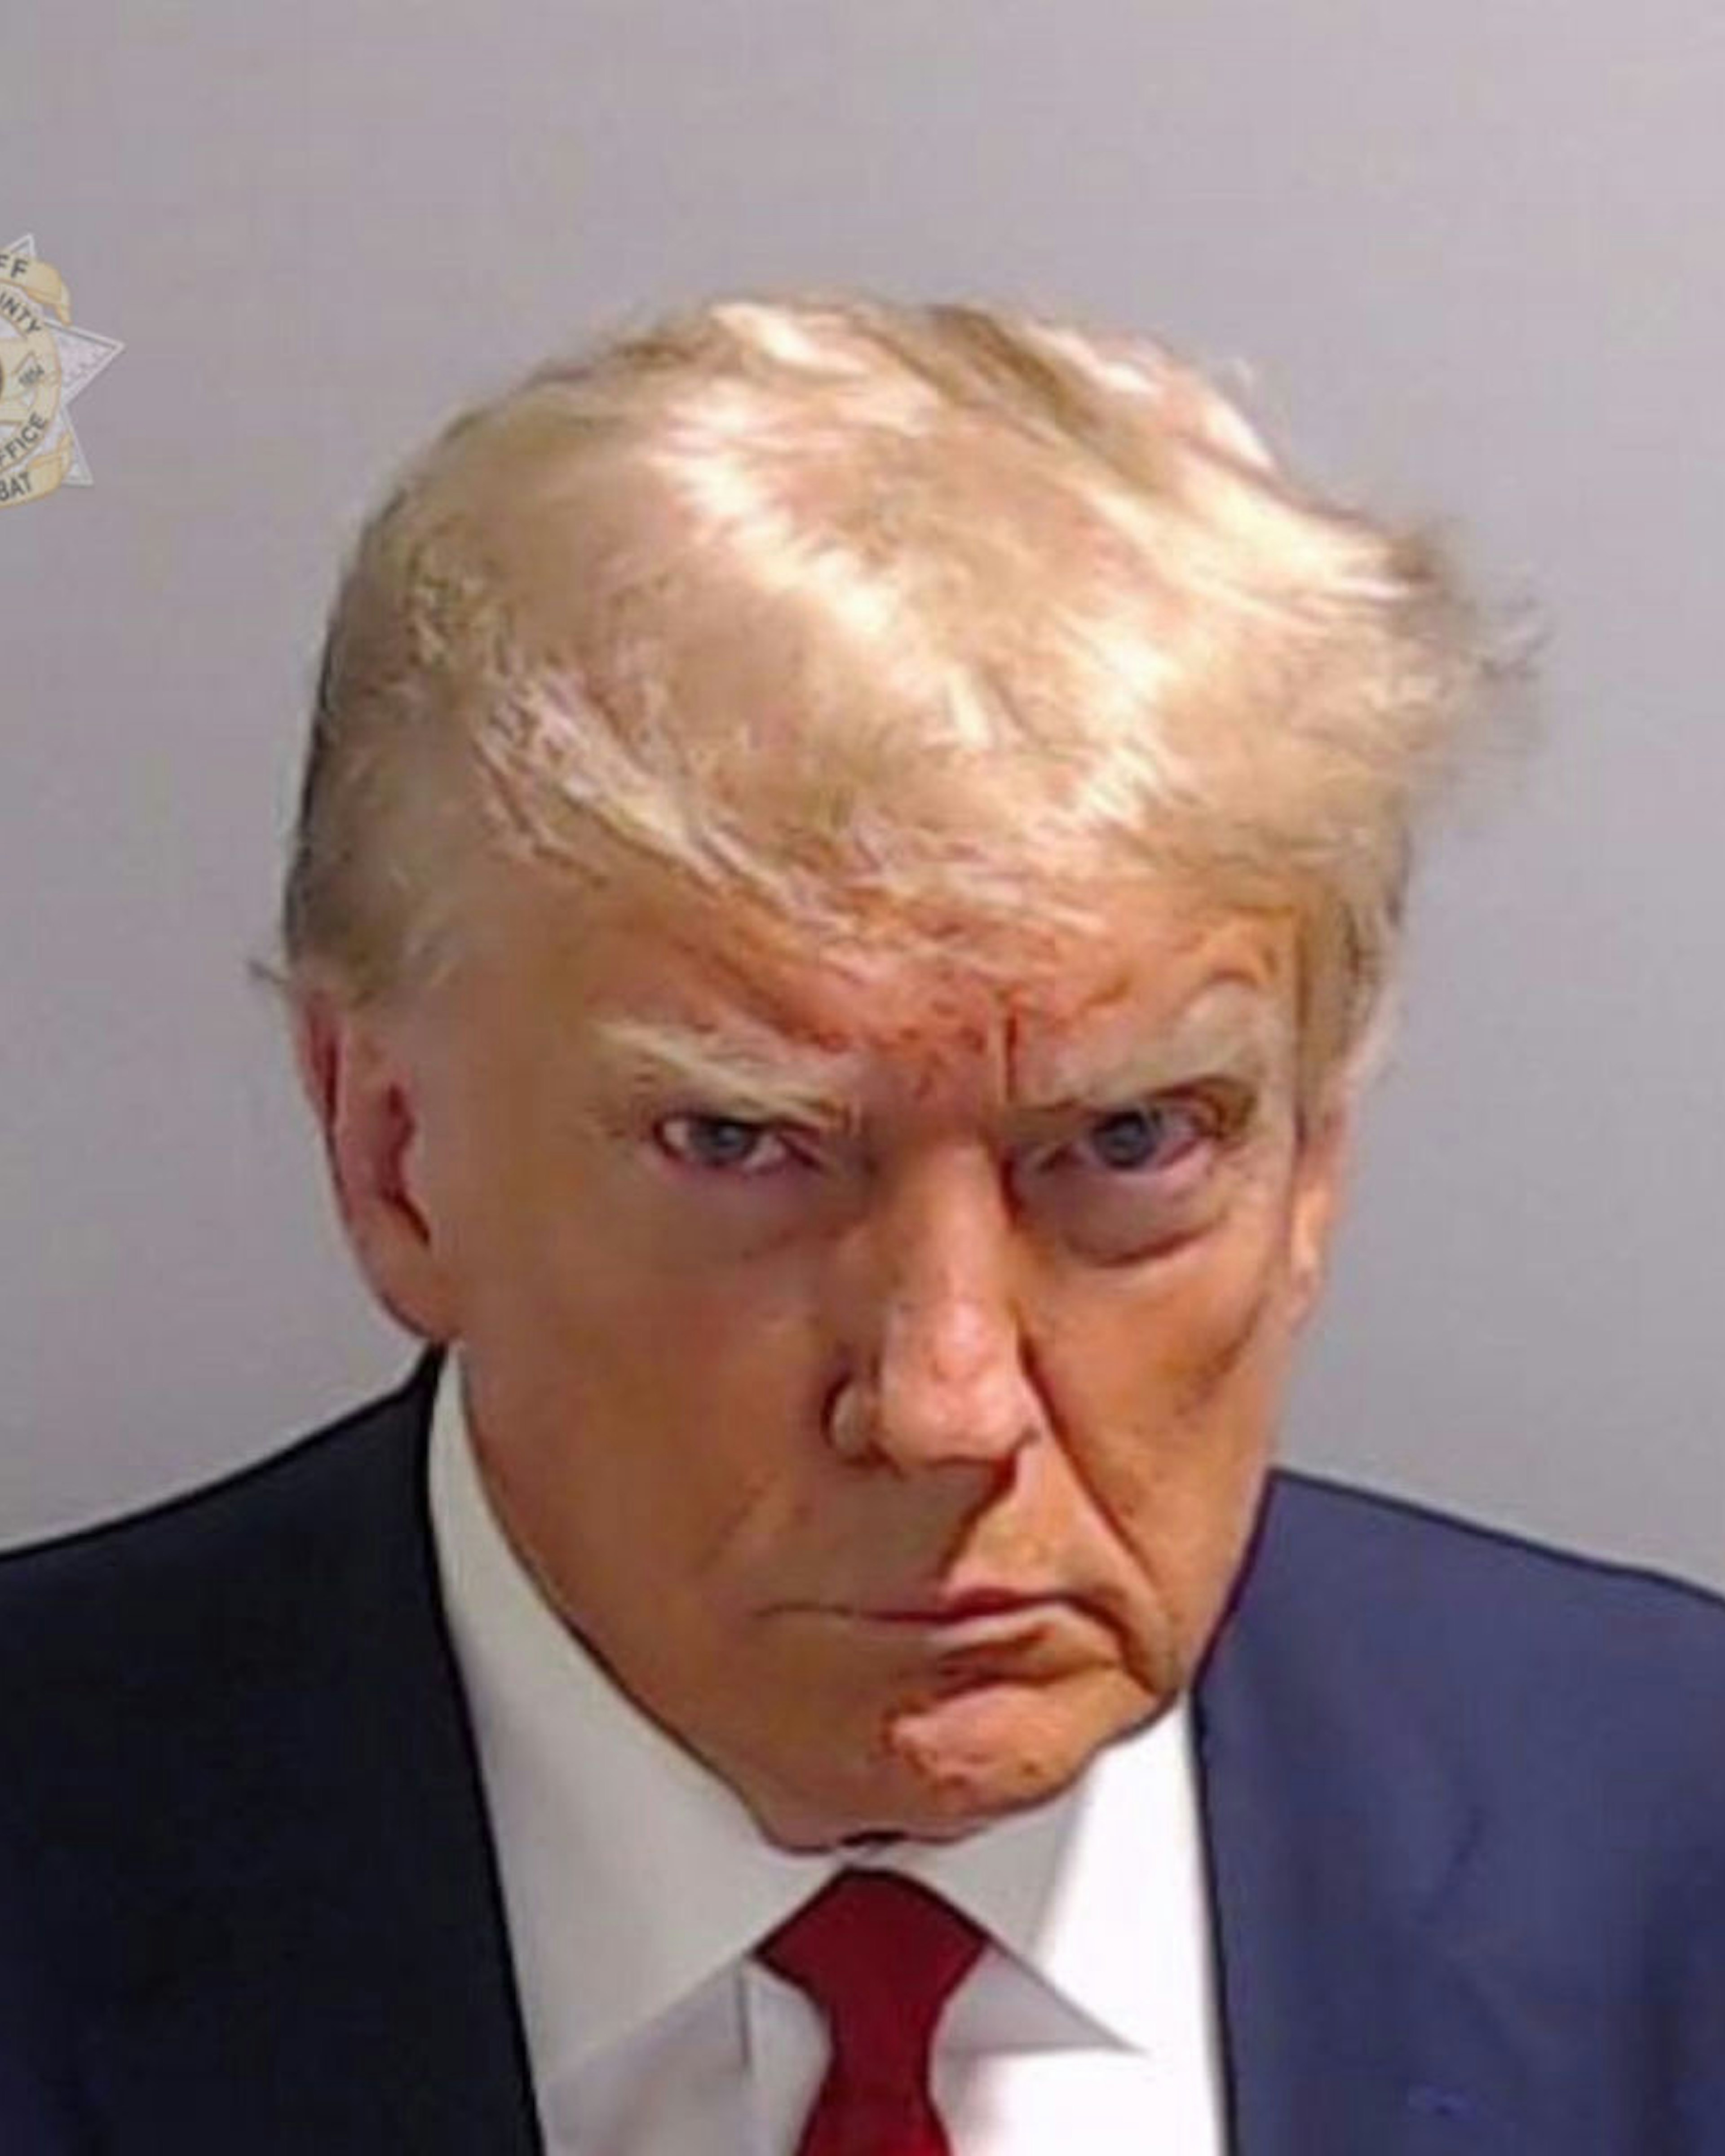 ATLANTA, GEORGIA, USA - AUGUST 24: (----EDITORIAL USE ONLY - MANDATORY CREDIT - 'FULTON COUNTY SHERIFF'S OFFICE / HANDOUT' - NO MARKETING NO ADVERTISING CAMPAIGNS - DISTRIBUTED AS A SERVICE TO CLIENTS----) Former U.S. President Donald Trump poses for his booking photo at the Fulton County Jail on August 24, 2023 in Atlanta, Georgia, United States. Trump was booked on 13 charges related to an alleged plan to overturn the results of the 2020 presidential election in Georgia. Trump and 18 others facing felony charges have been ordered to turn themselves in to the Fulton County Jail by August 25. (Photo by Fulton County Sheriff's Office / Handout/Anadolu Agency via Getty Images)